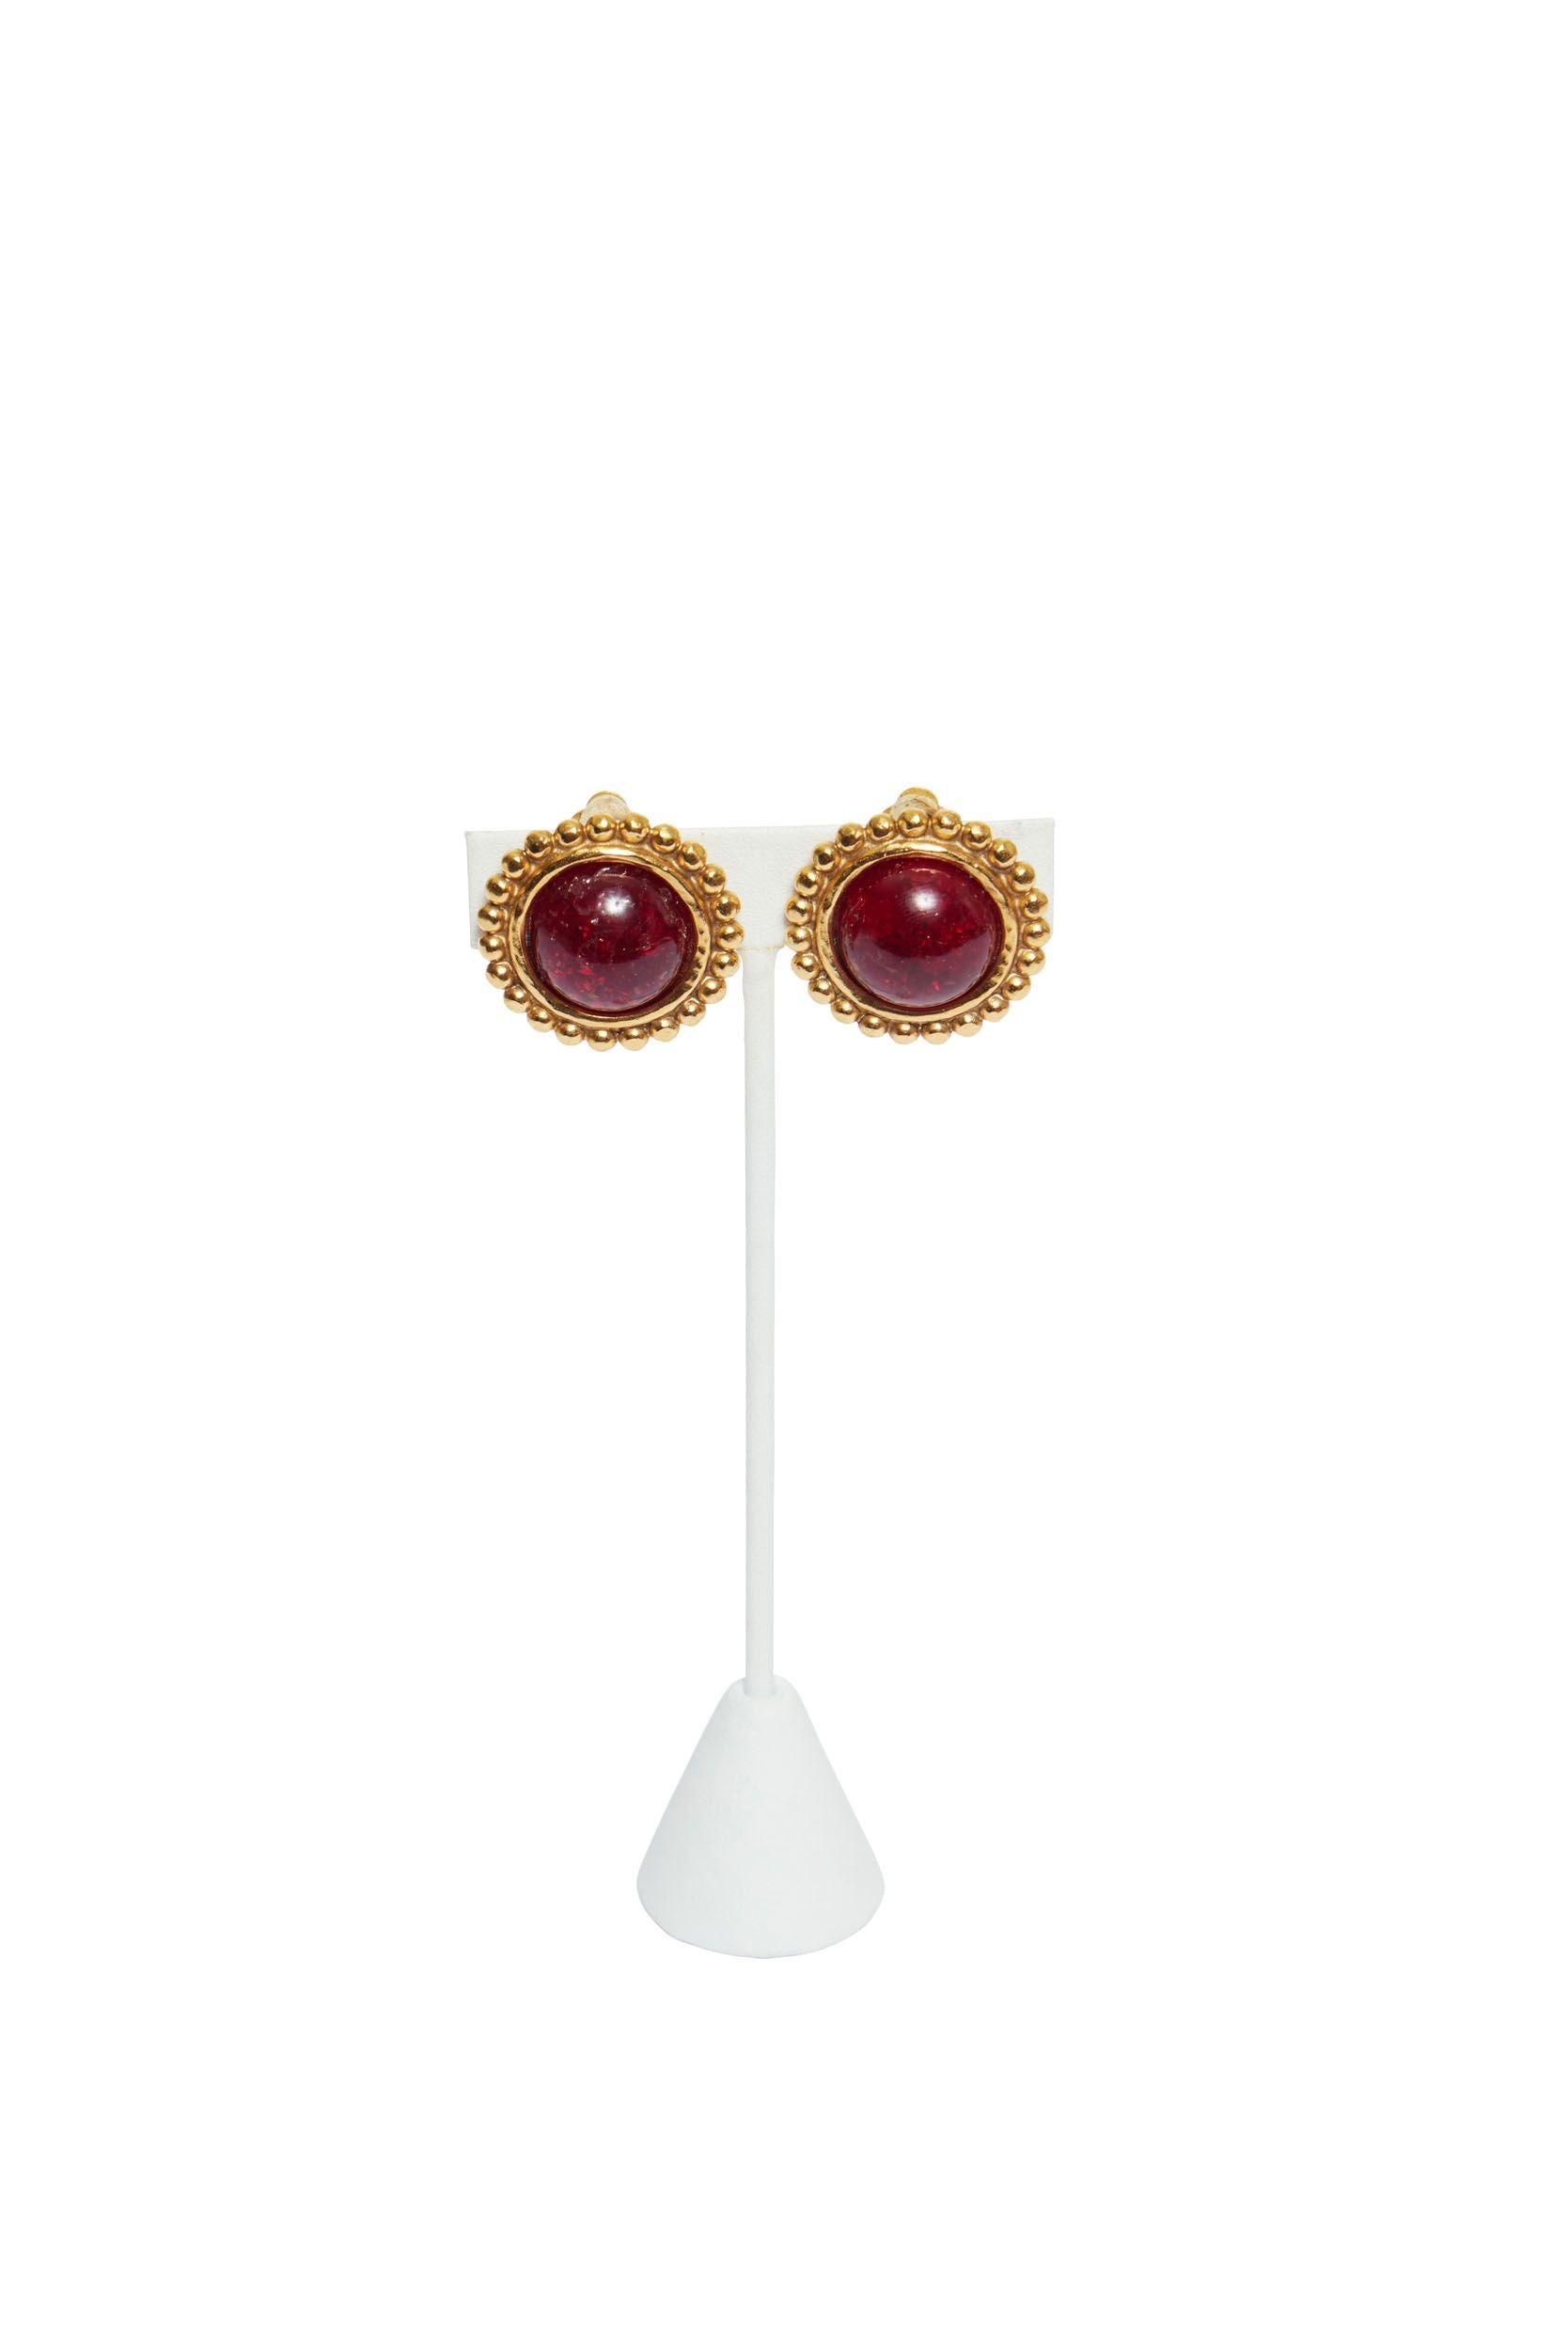 Chanel Red Gripoix and Pearl Drop Vintage Earrings